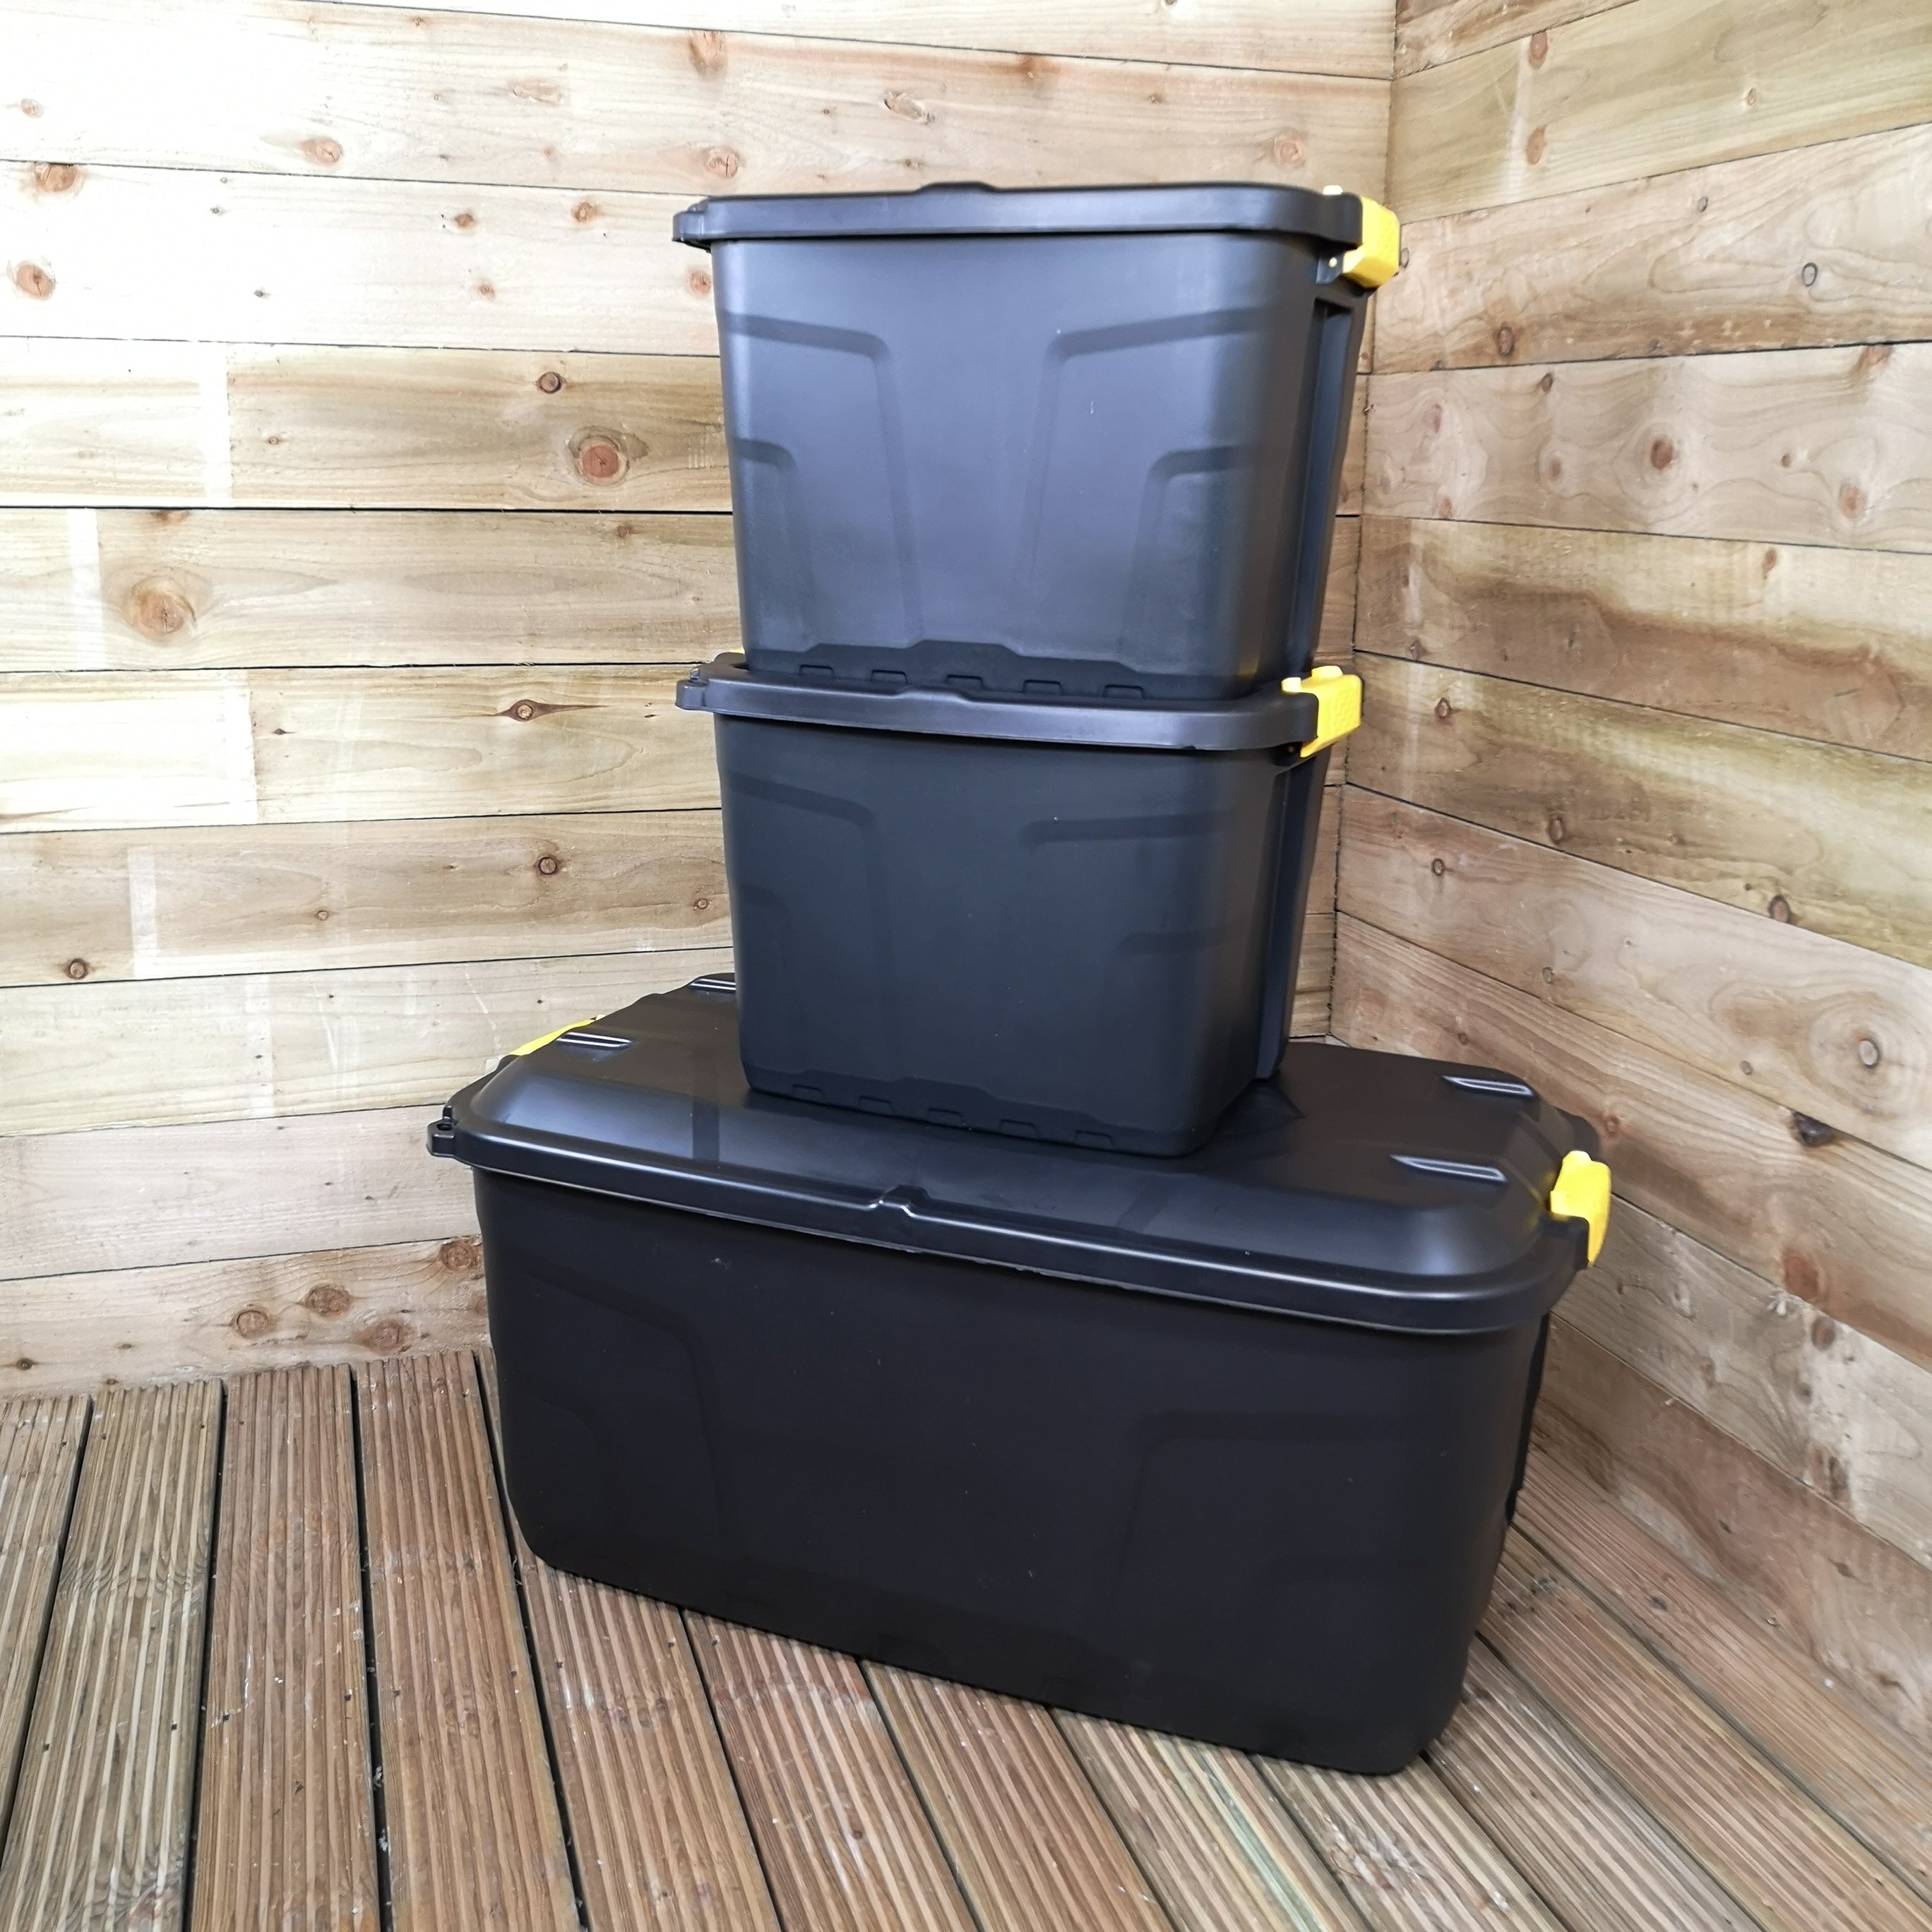 1 x 145L AND 2 x 60L Heavy Duty Trunks 1 on Wheels Sturdy, Lockable, Stackable and Nestable Design Storage Chest with Clips in Black